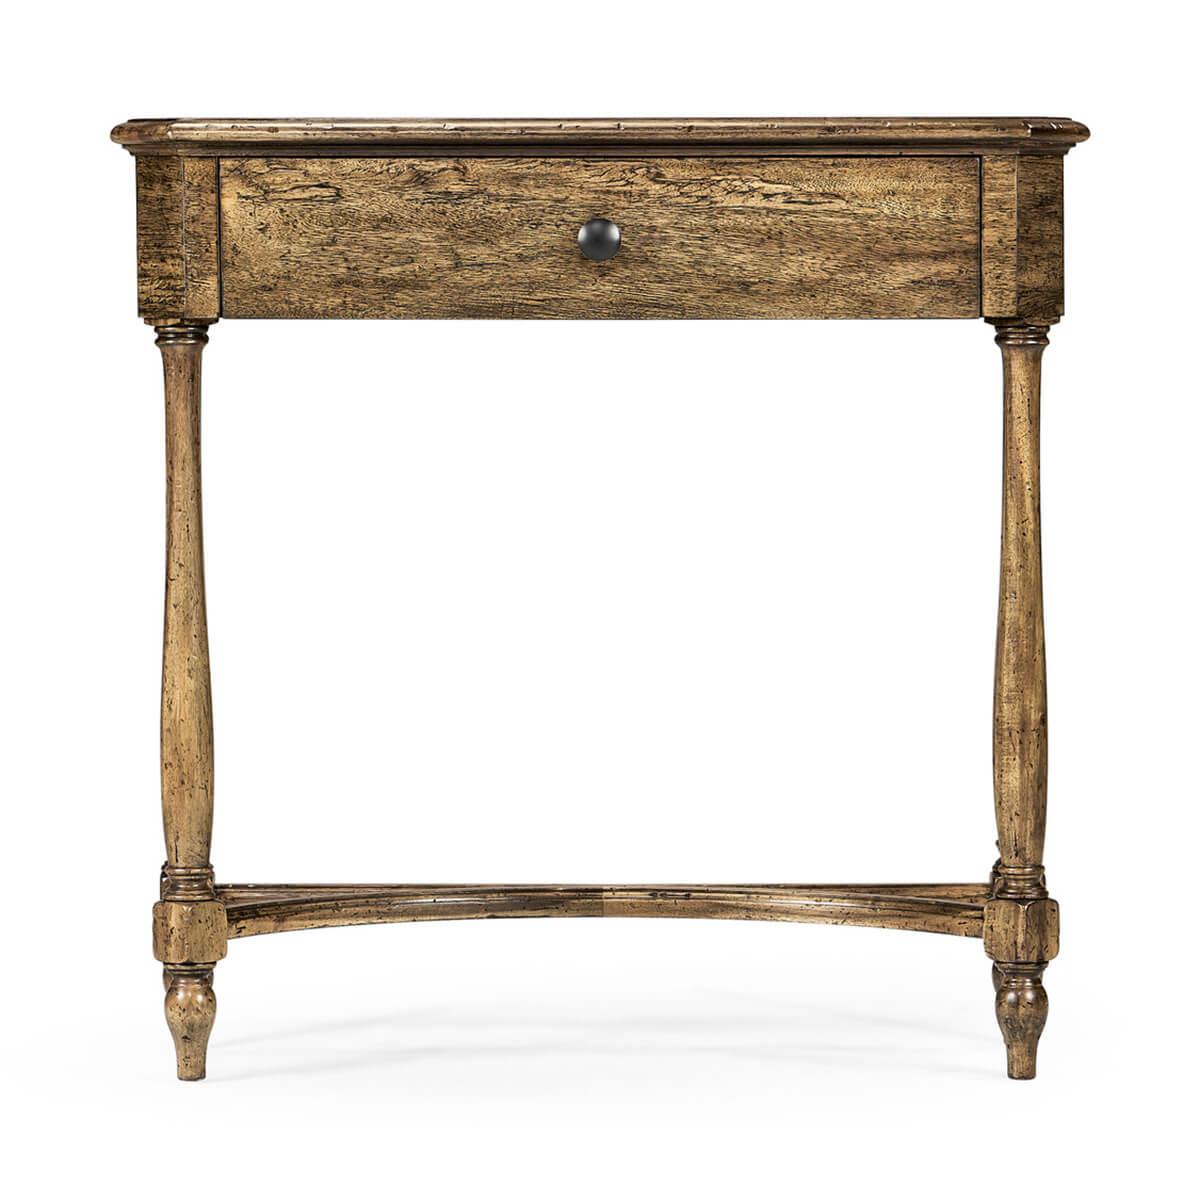 Georgian style rustic driftwood console table with oak secondary woods, canted corners and a molded edge top, a long single frieze drawer and raised on turned legs with a stretcher base.

Dimensions: 31